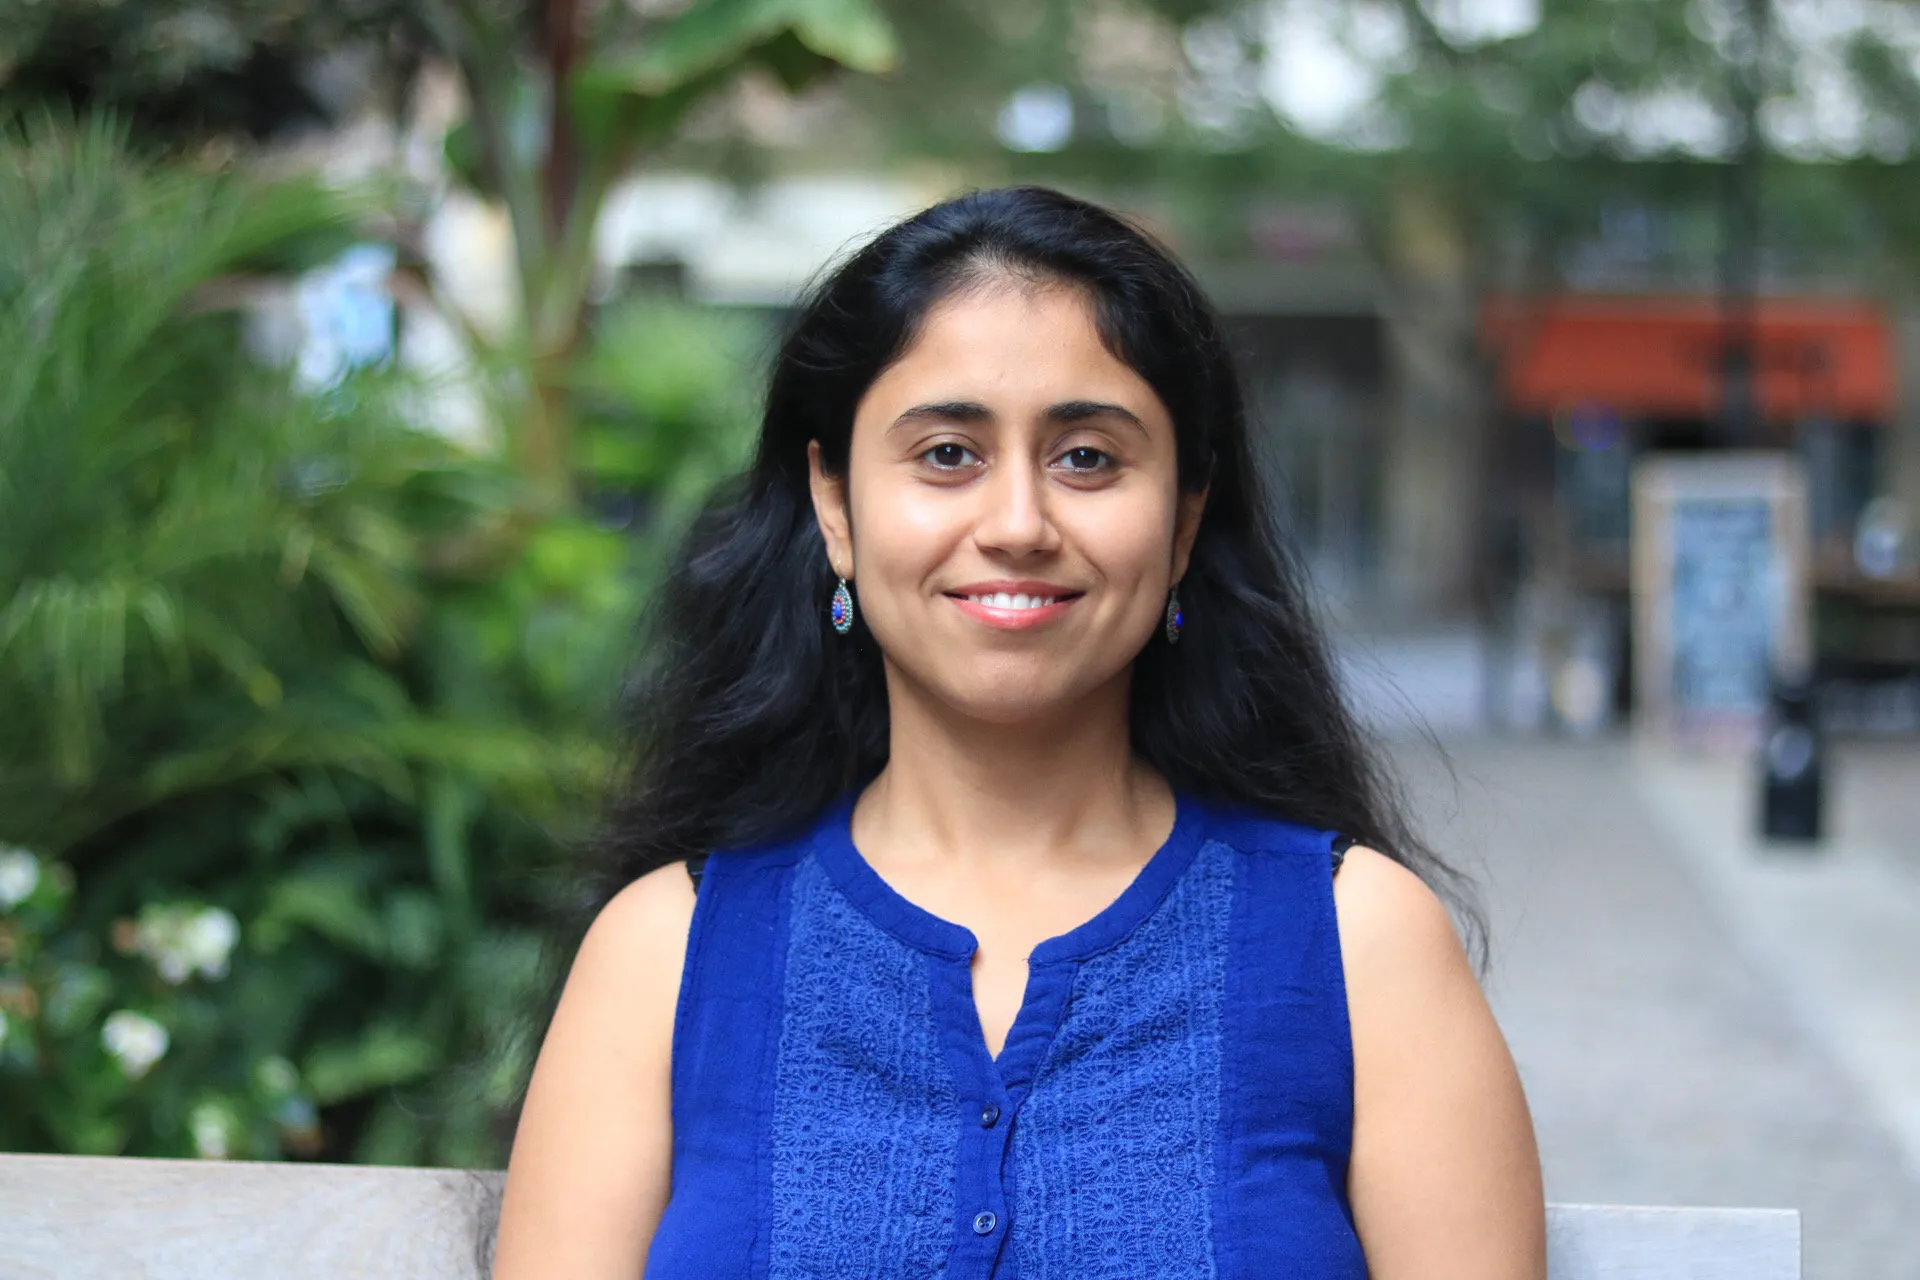 A photo portrait of Ridhima Mehrotra, cropped to show her head and shoulders. She is smiling, has long hair, and is wearing earrings and a sleeveless shirt. In the background, out-of-focus trees and shrubs are visible.